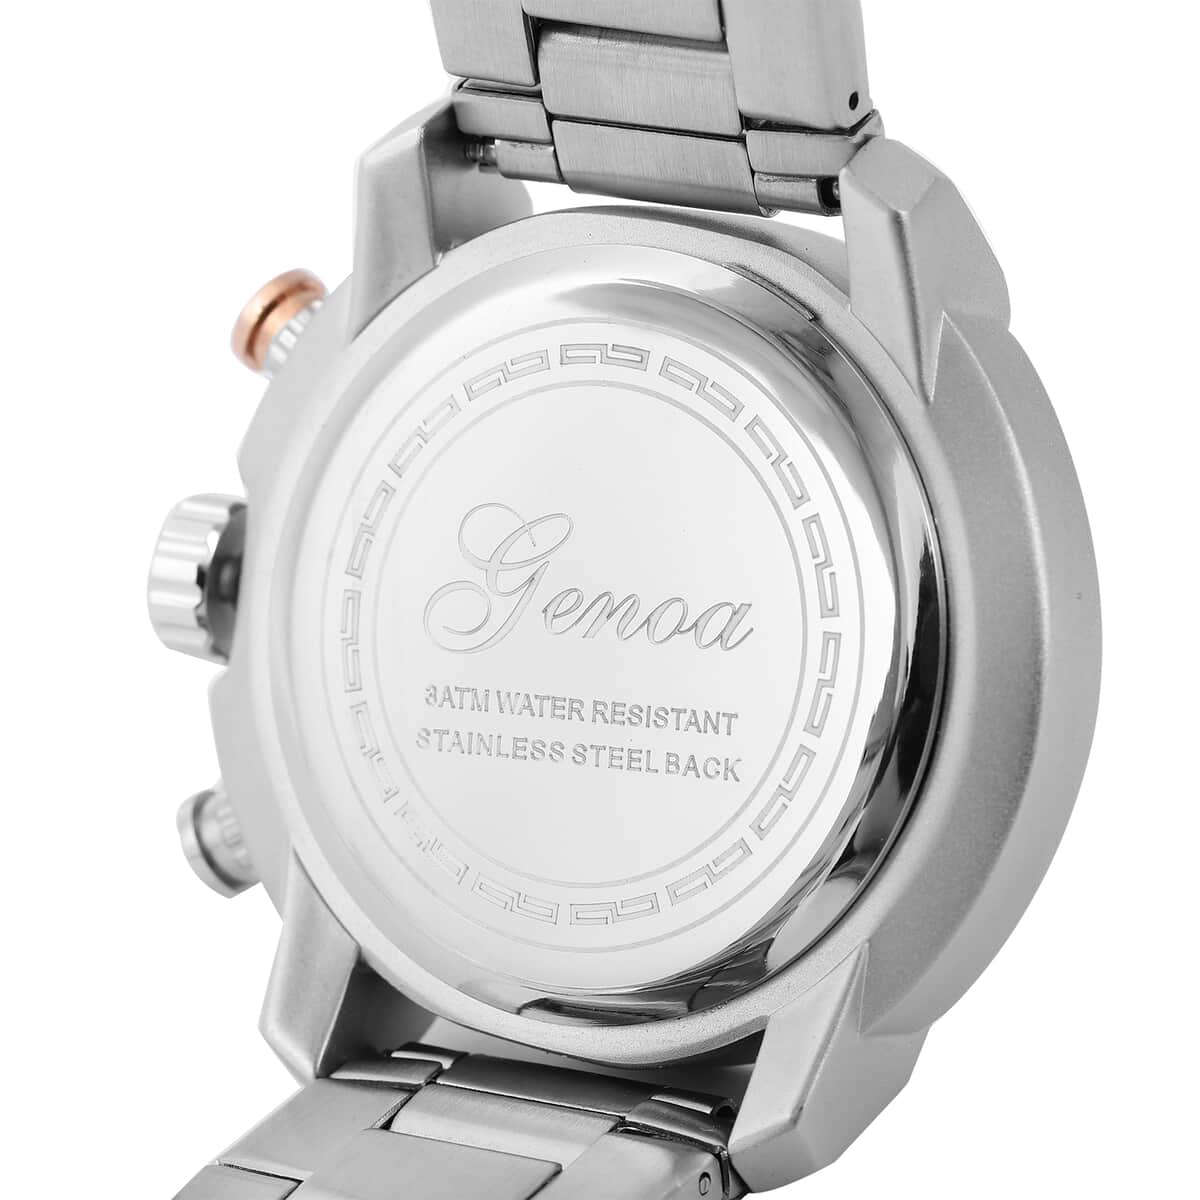 Genoa Multi-Functional Quartz Movement Watch with Gray Dial & Stainless Steel Strap (49.5 mm) image number 5